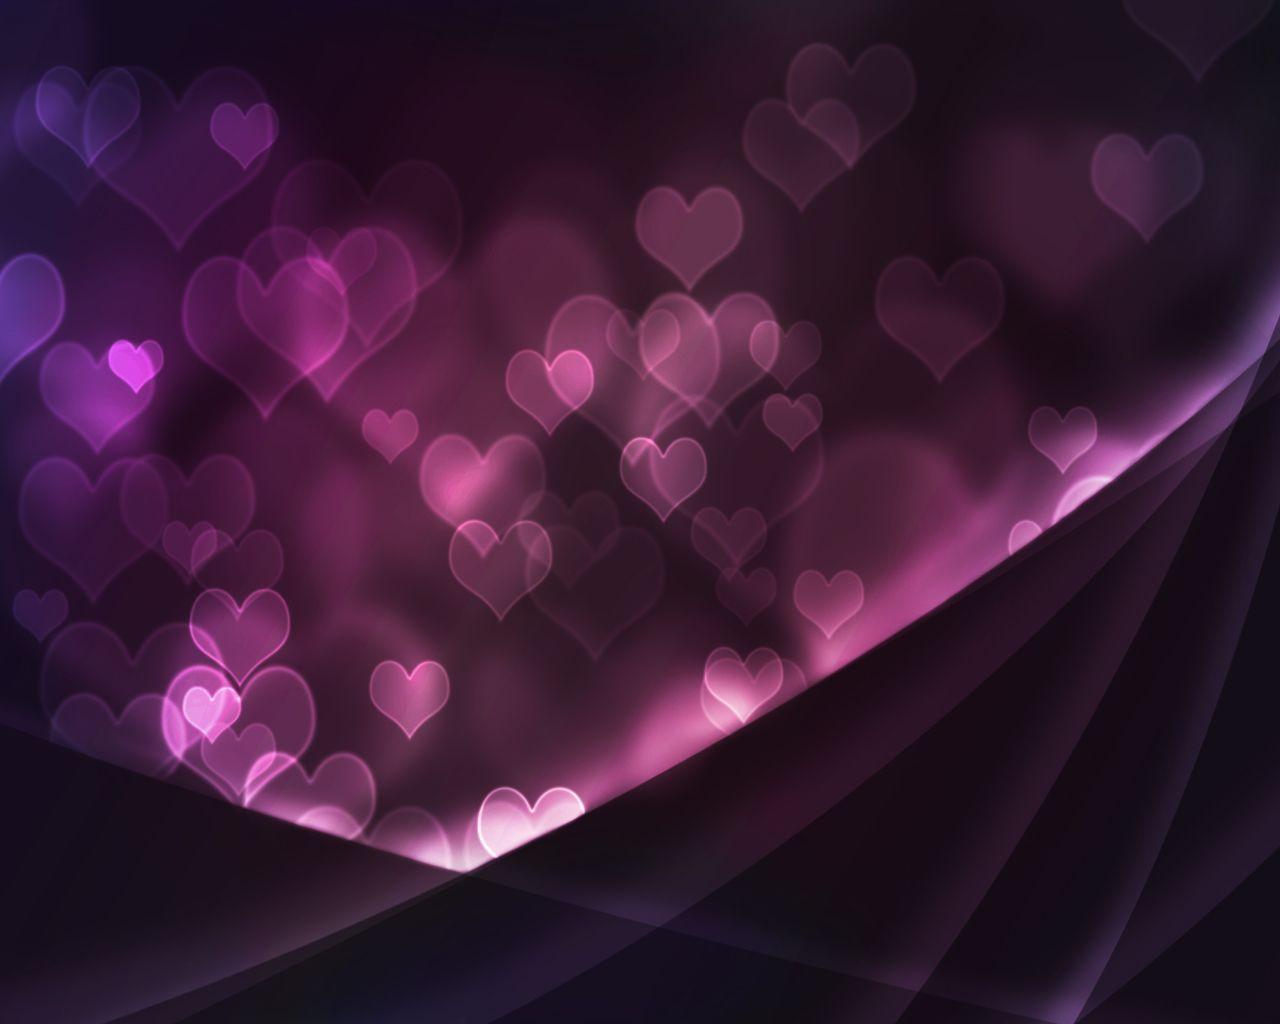 Cool Heart Background pink hearts. iphone wallpaper 2 Lock